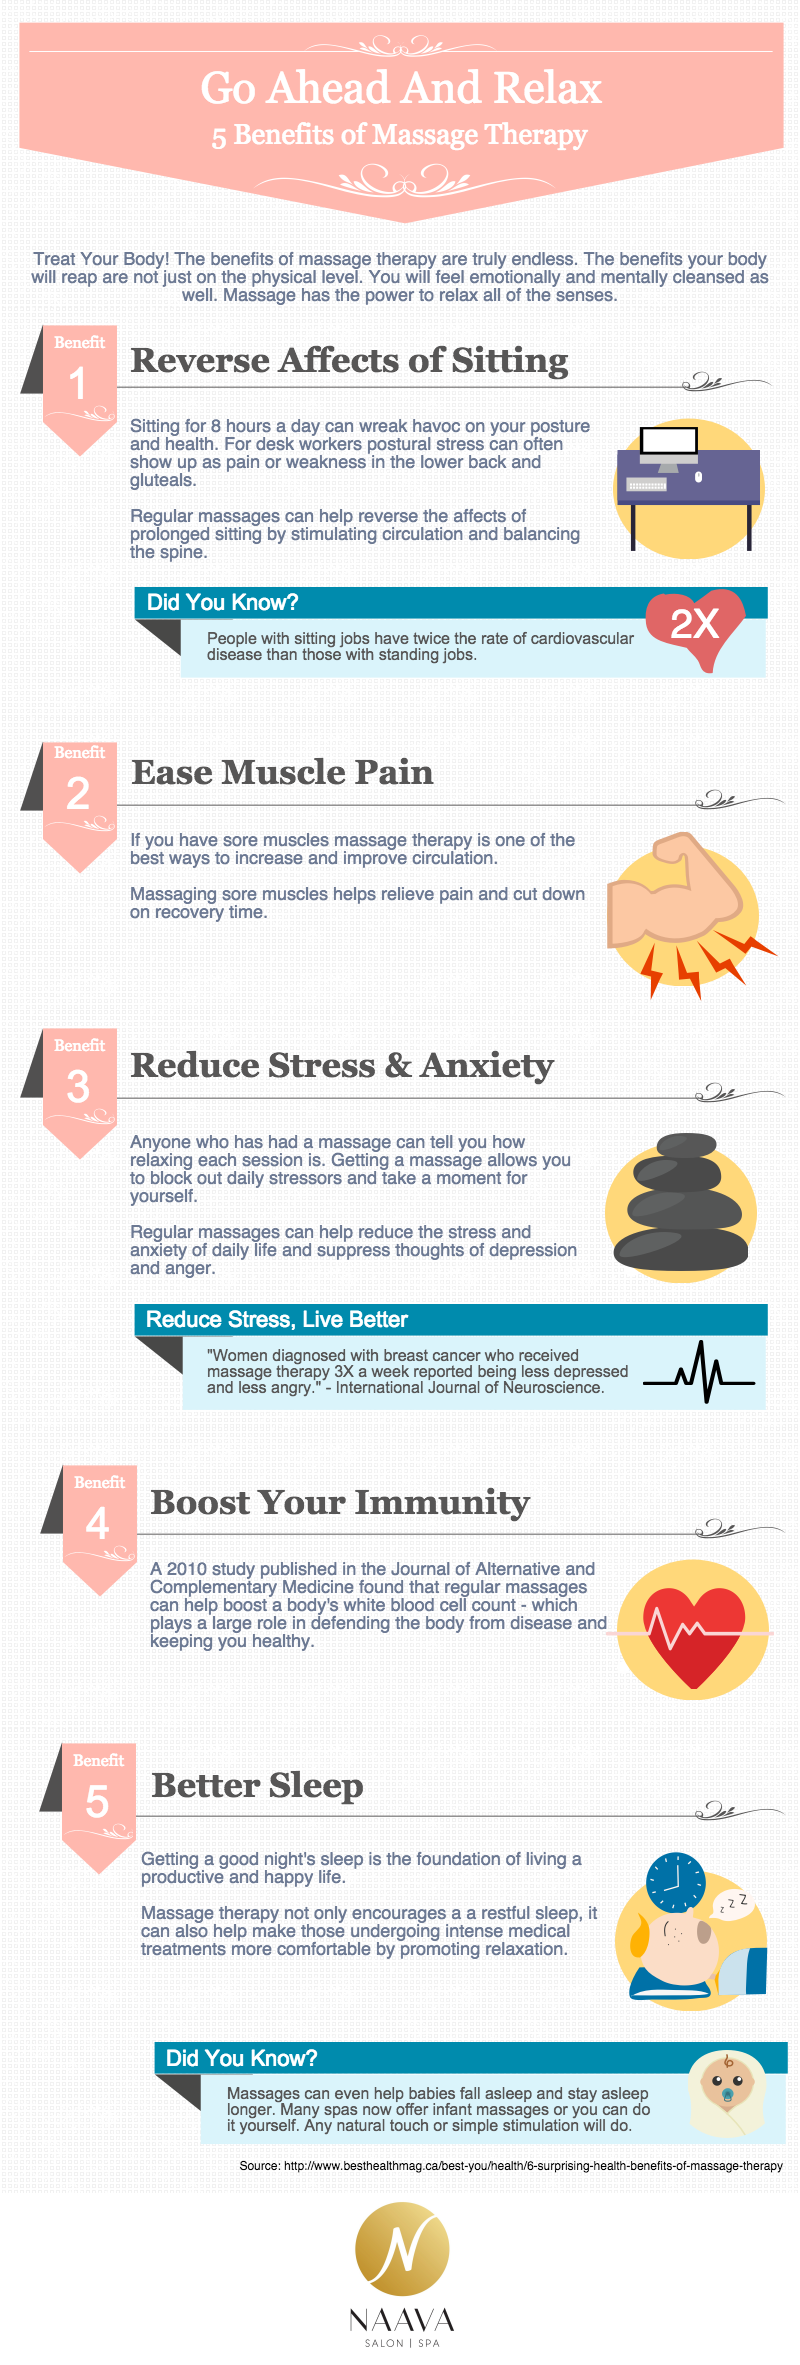 https://i.visual.ly/images/5-benefits-of-massage-therapy_55c4d93902e48.png